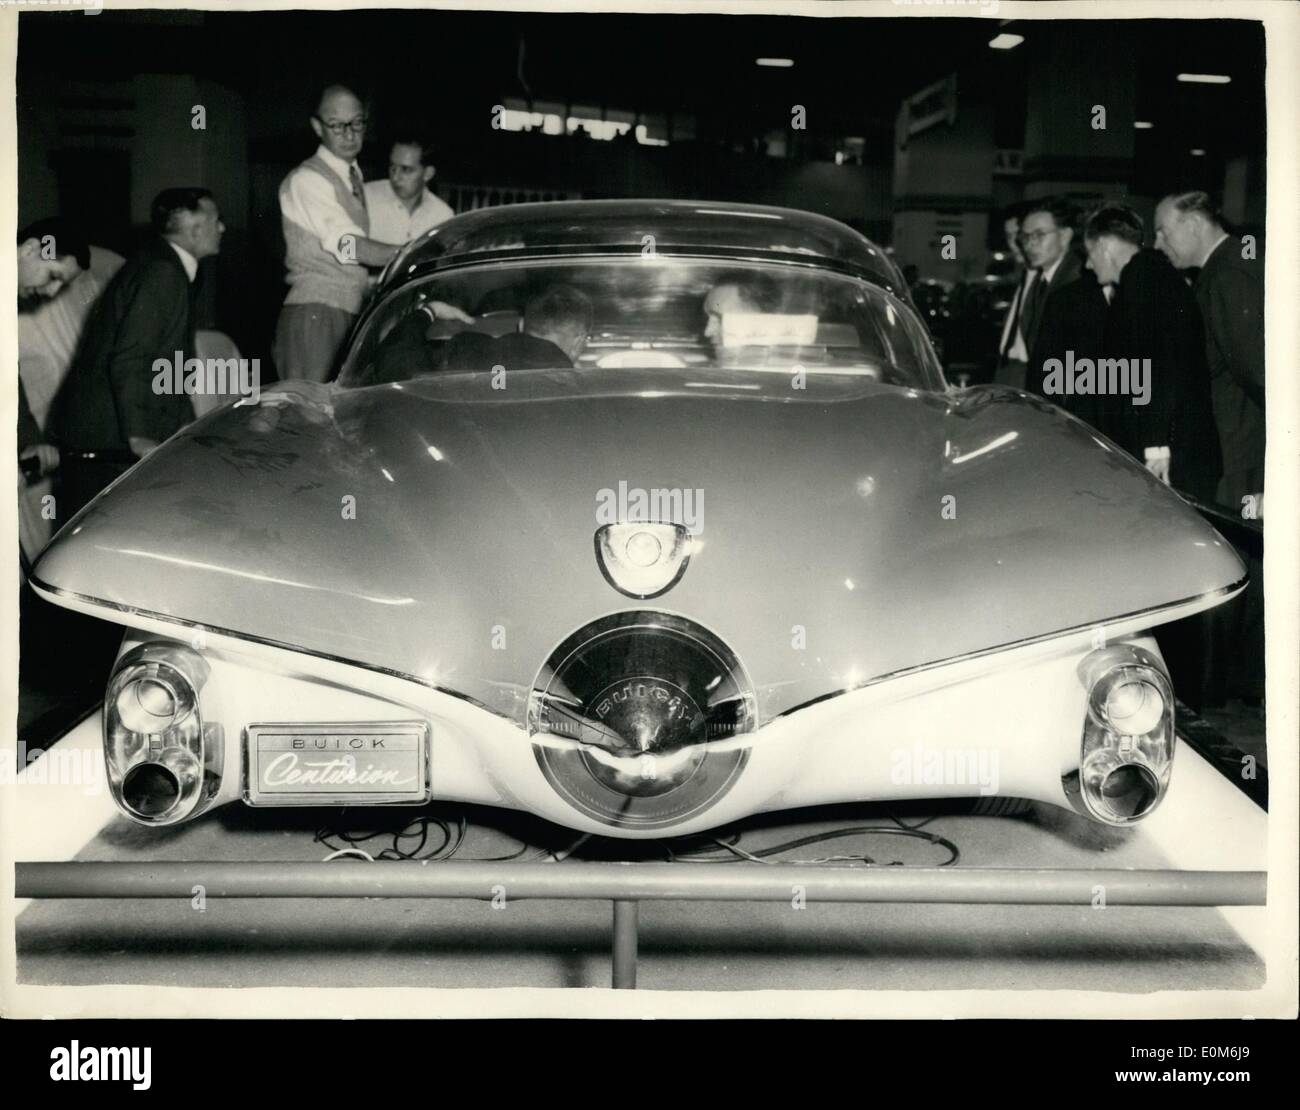 Oct. 10, 1953 - Pre-view of the motor show. The Buick - with T. V. rear mirror.: Photo shows view of the Buick Centurion which is fitted with a Television lens in the rear which shows the driver what is happening behind ona dashboard screen at the motor show pre view today, at Earls Court. Stock Photo